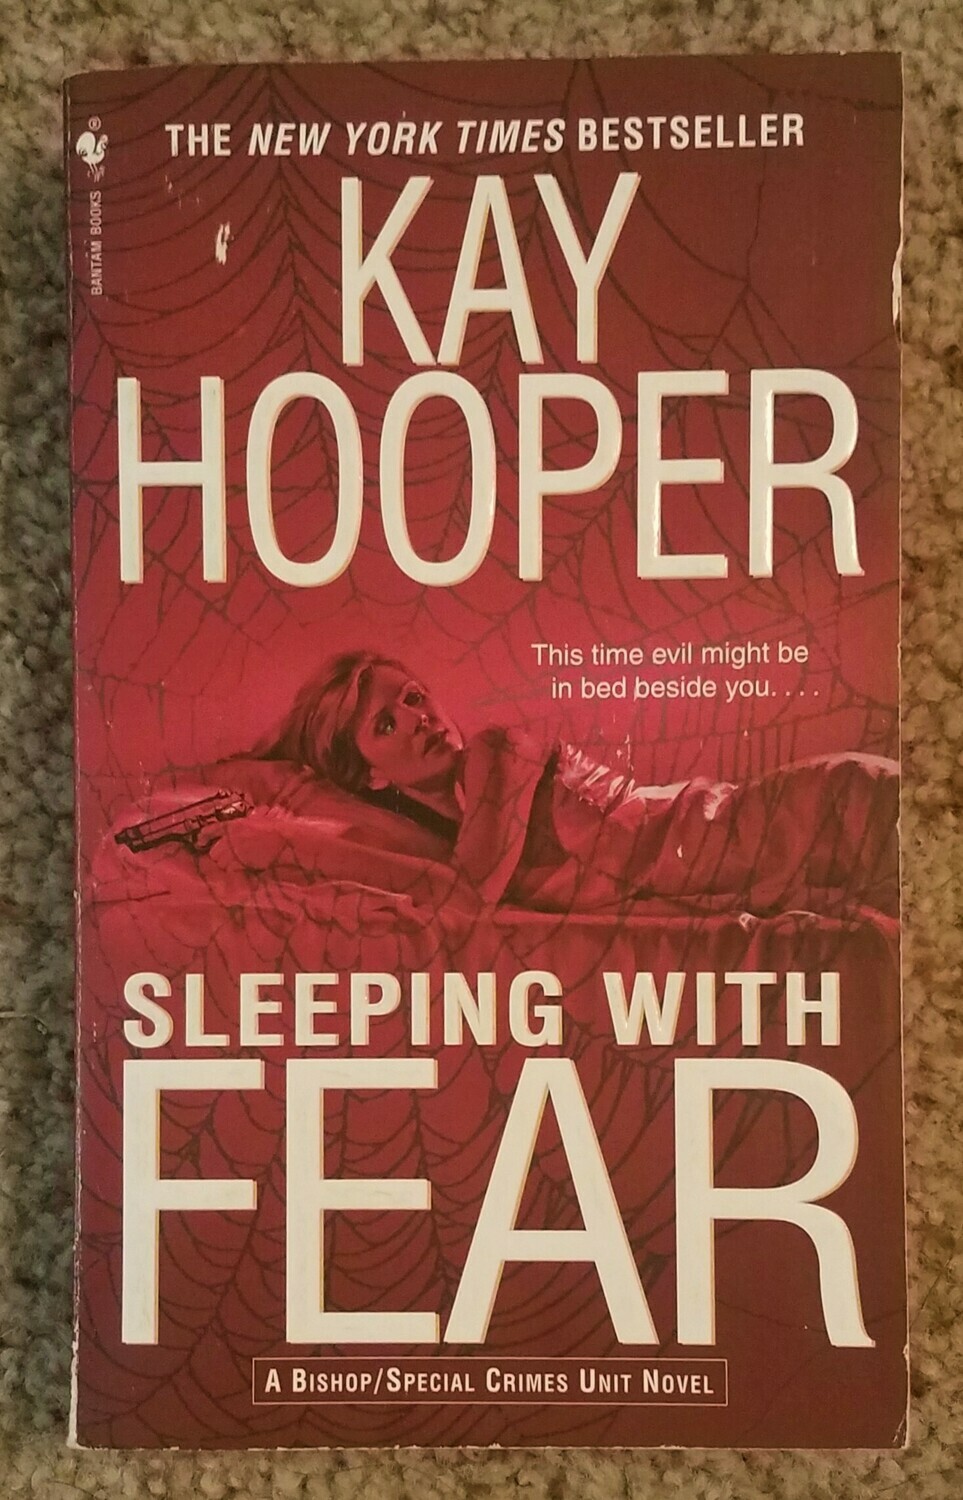 Sleeping with Fear by Kay Hooper